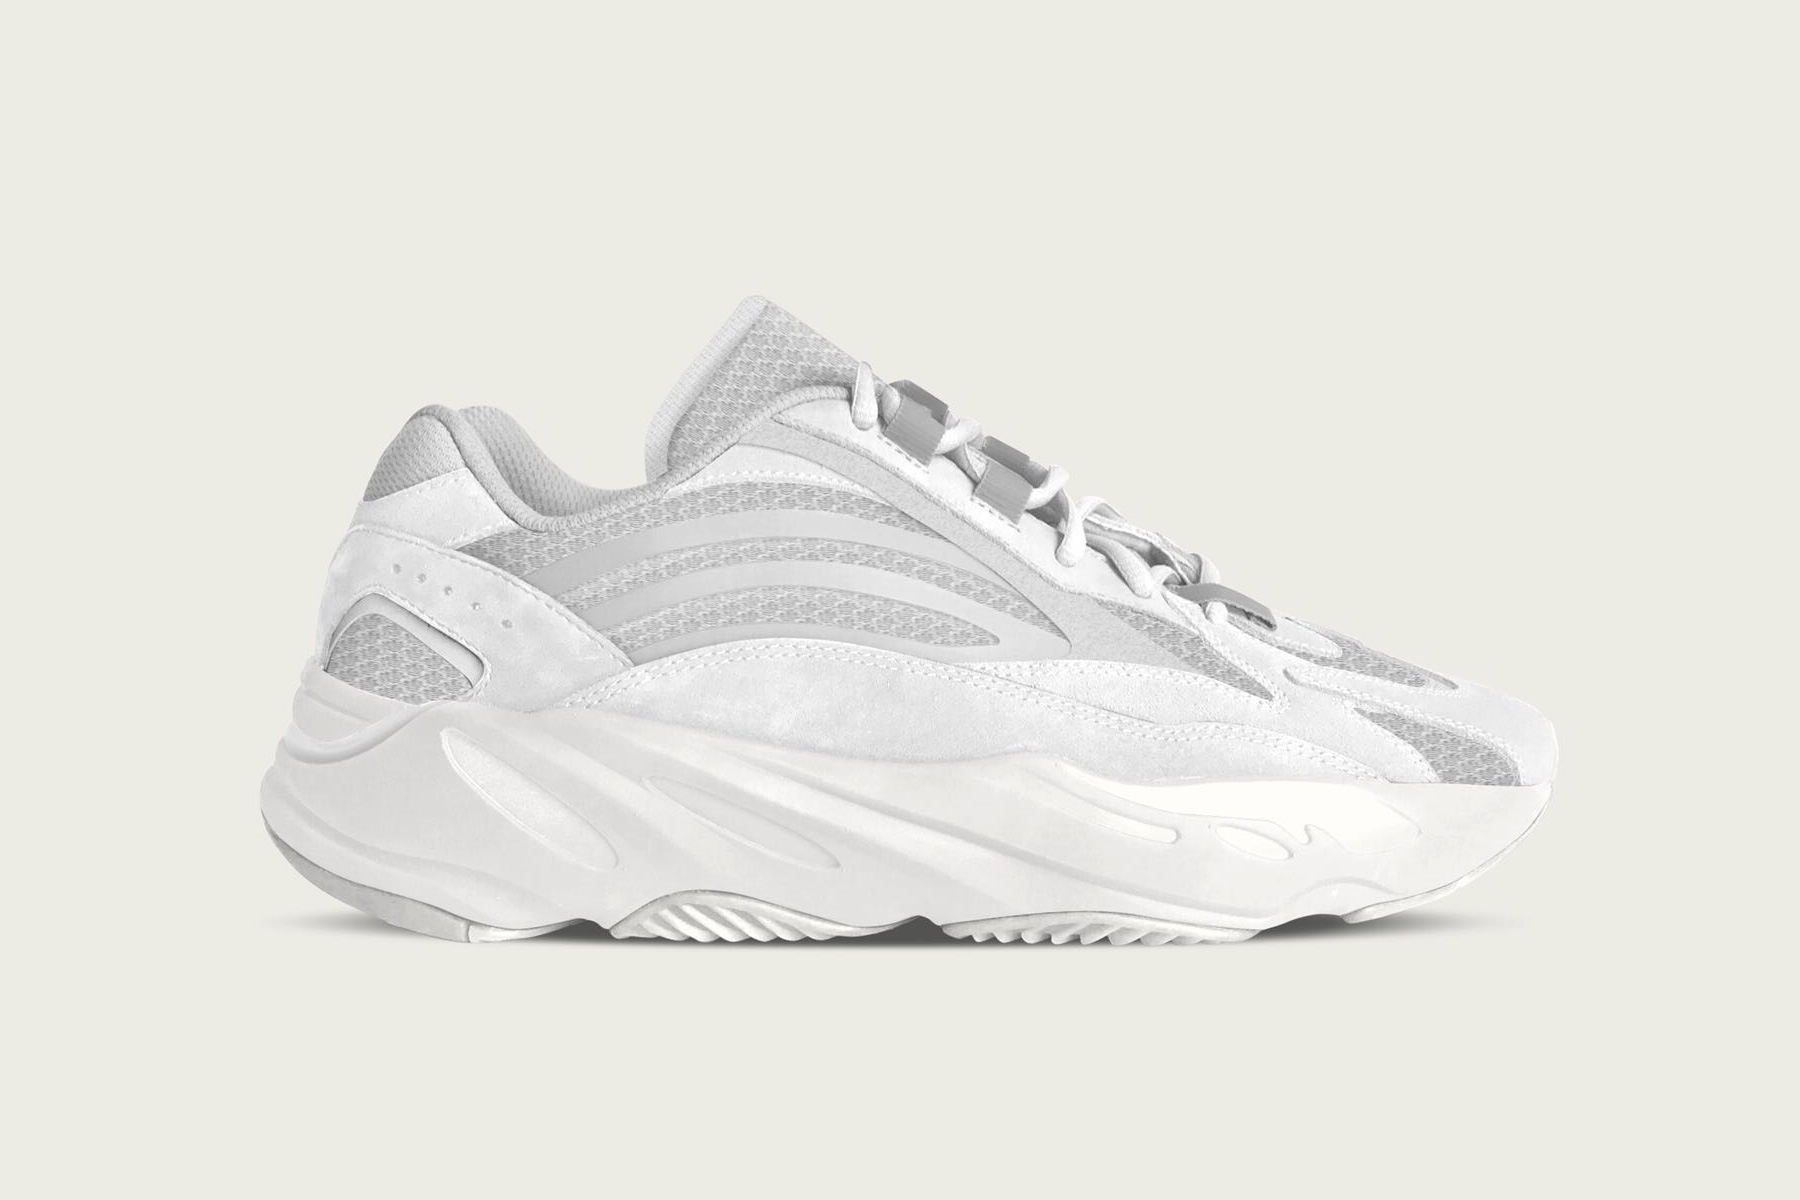 adidas YEEZY BOOST 700 V2 Static Potential Look | Hypebeast